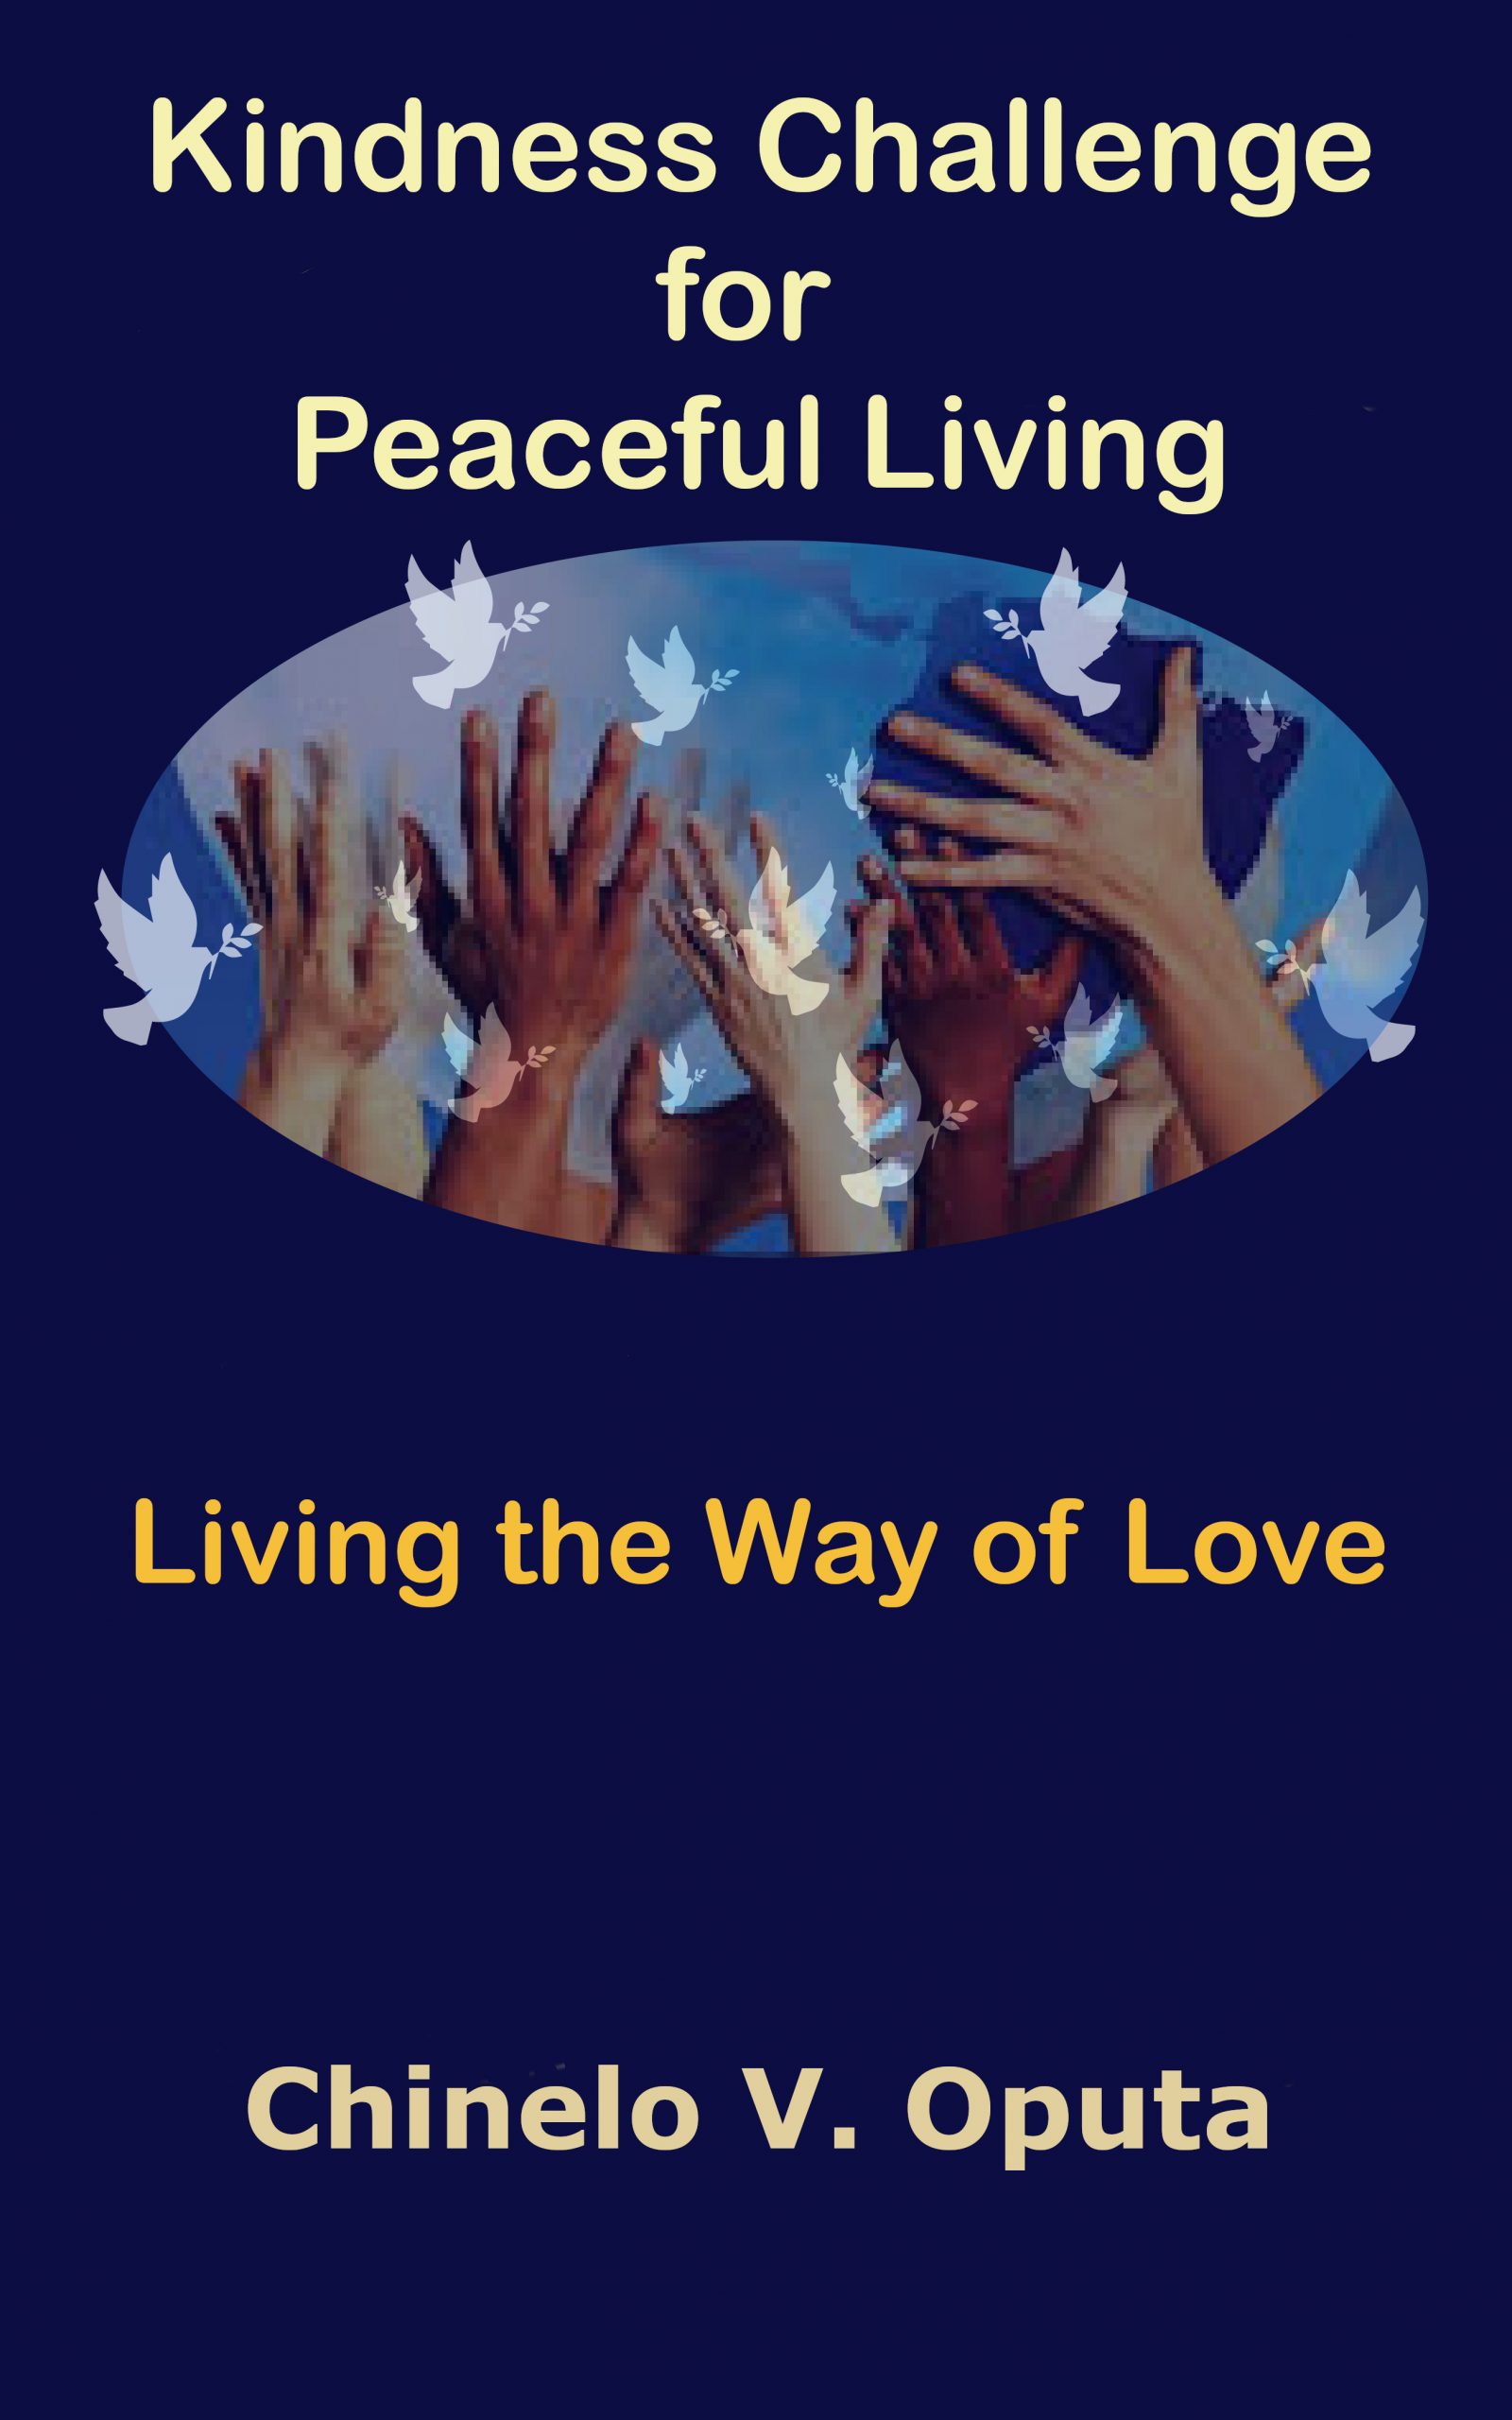 New Release on Kindle: Christian Book Offers Practical Steps to Regain Total Inner Peace (Free on Kindle as from 5th April, 2020)